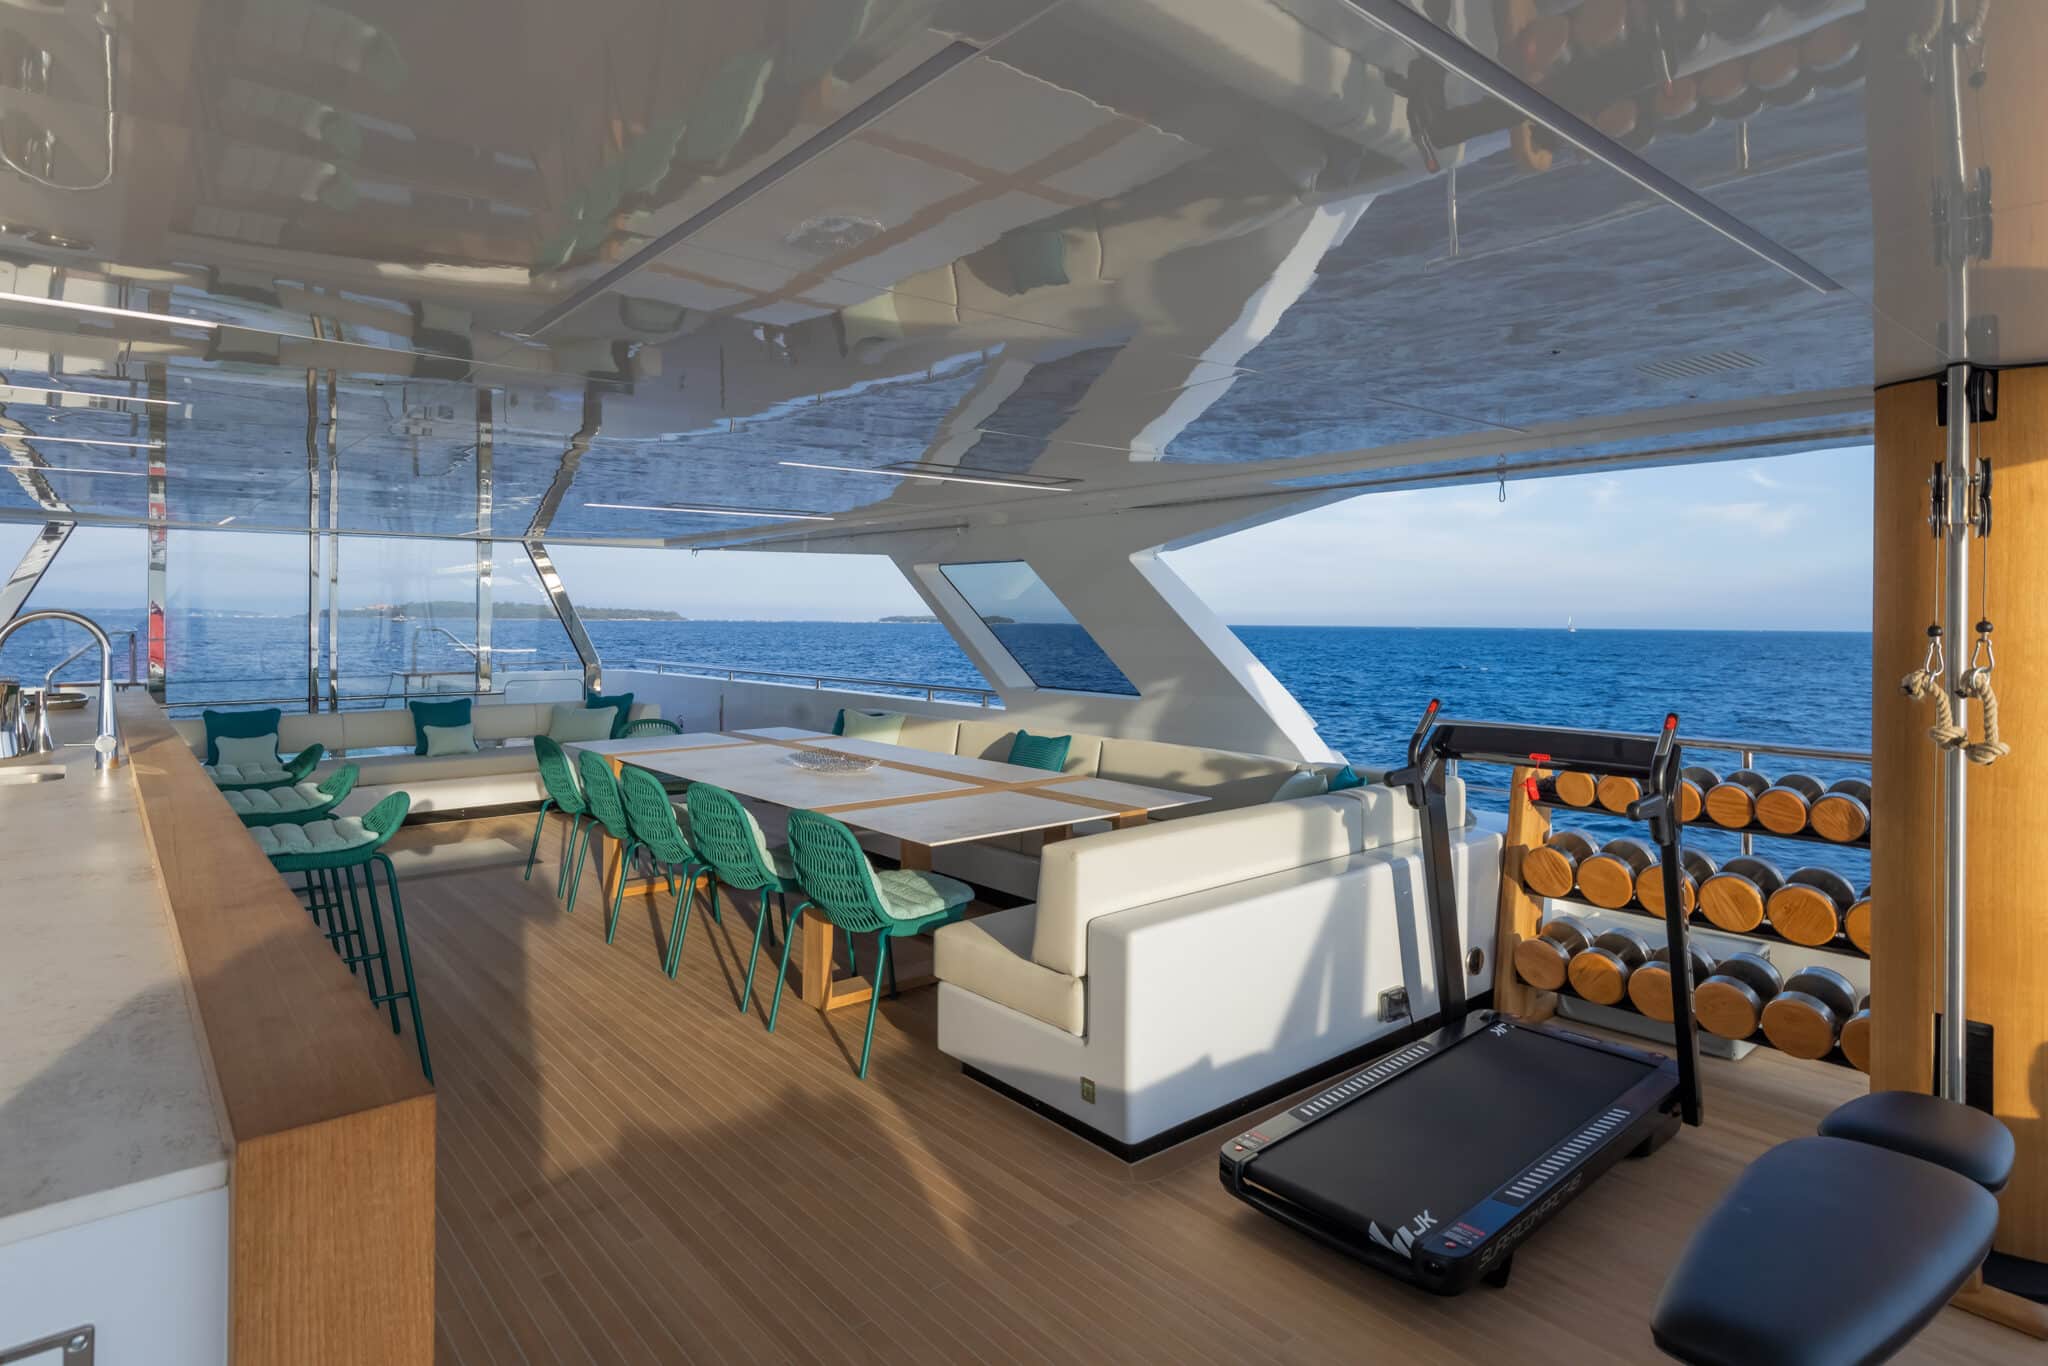 Emocean by Rosetti Super Yacht  - RSY 38M EXP EMOCEAN Sundeck 01 scaled 140